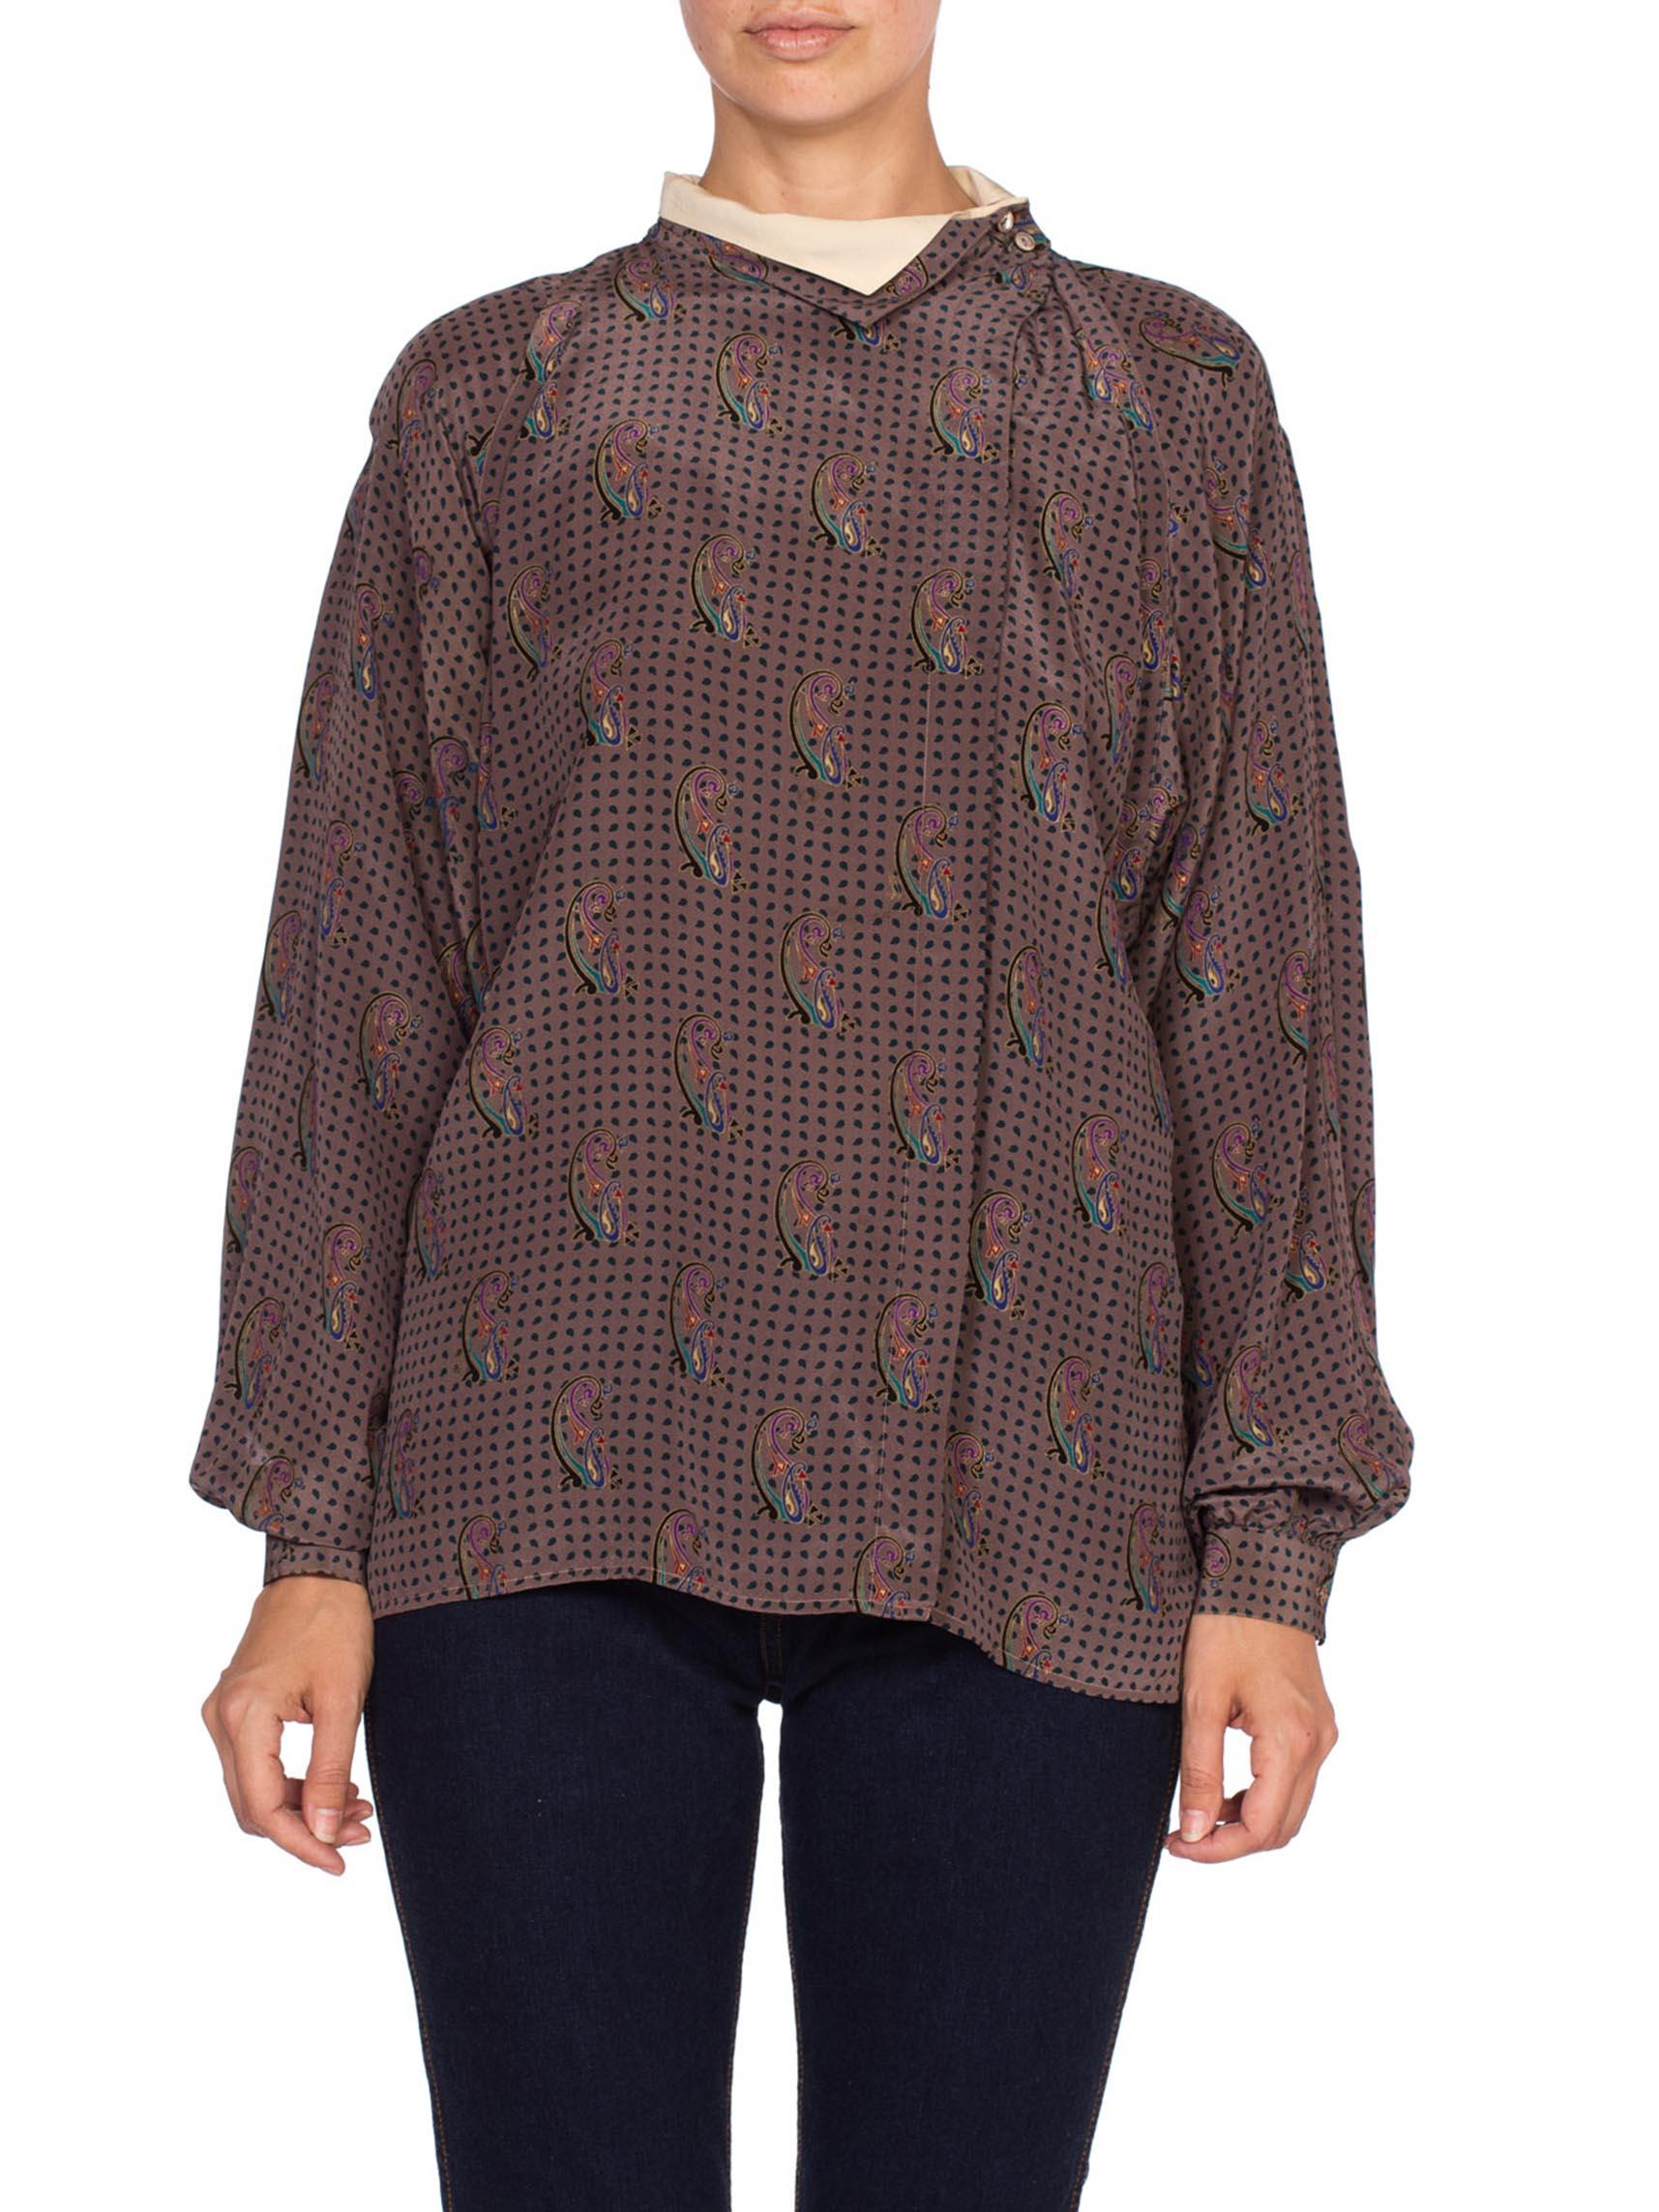 Black 1970'S GUCCI Paisley Silk Blouse With Metallic Gold Print Top For Sale